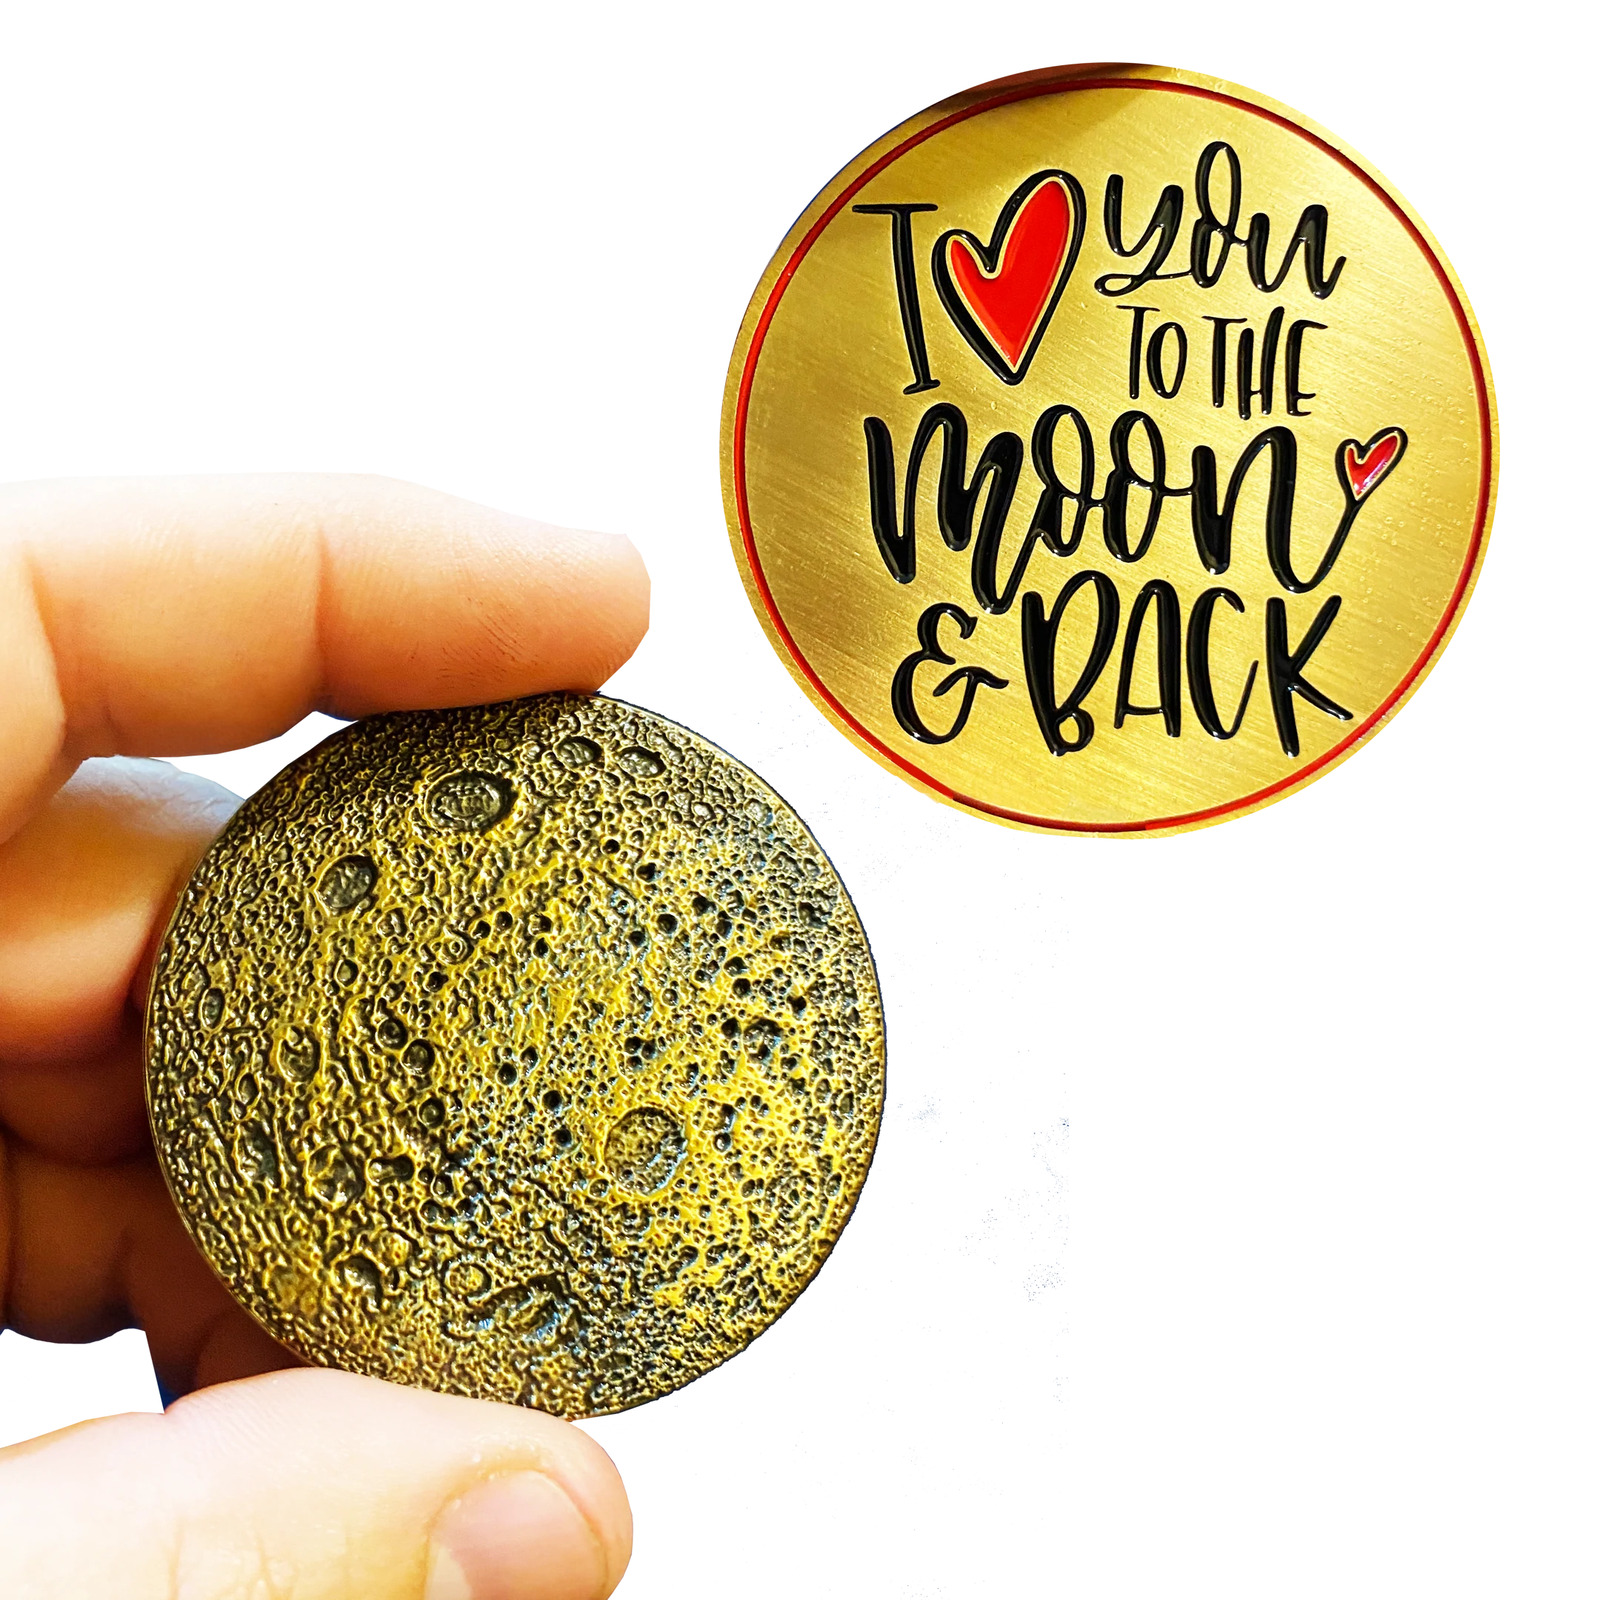 AA-019 I Love You to the Moon and Back Heart Challenge Coin Medallion with 3D Mo